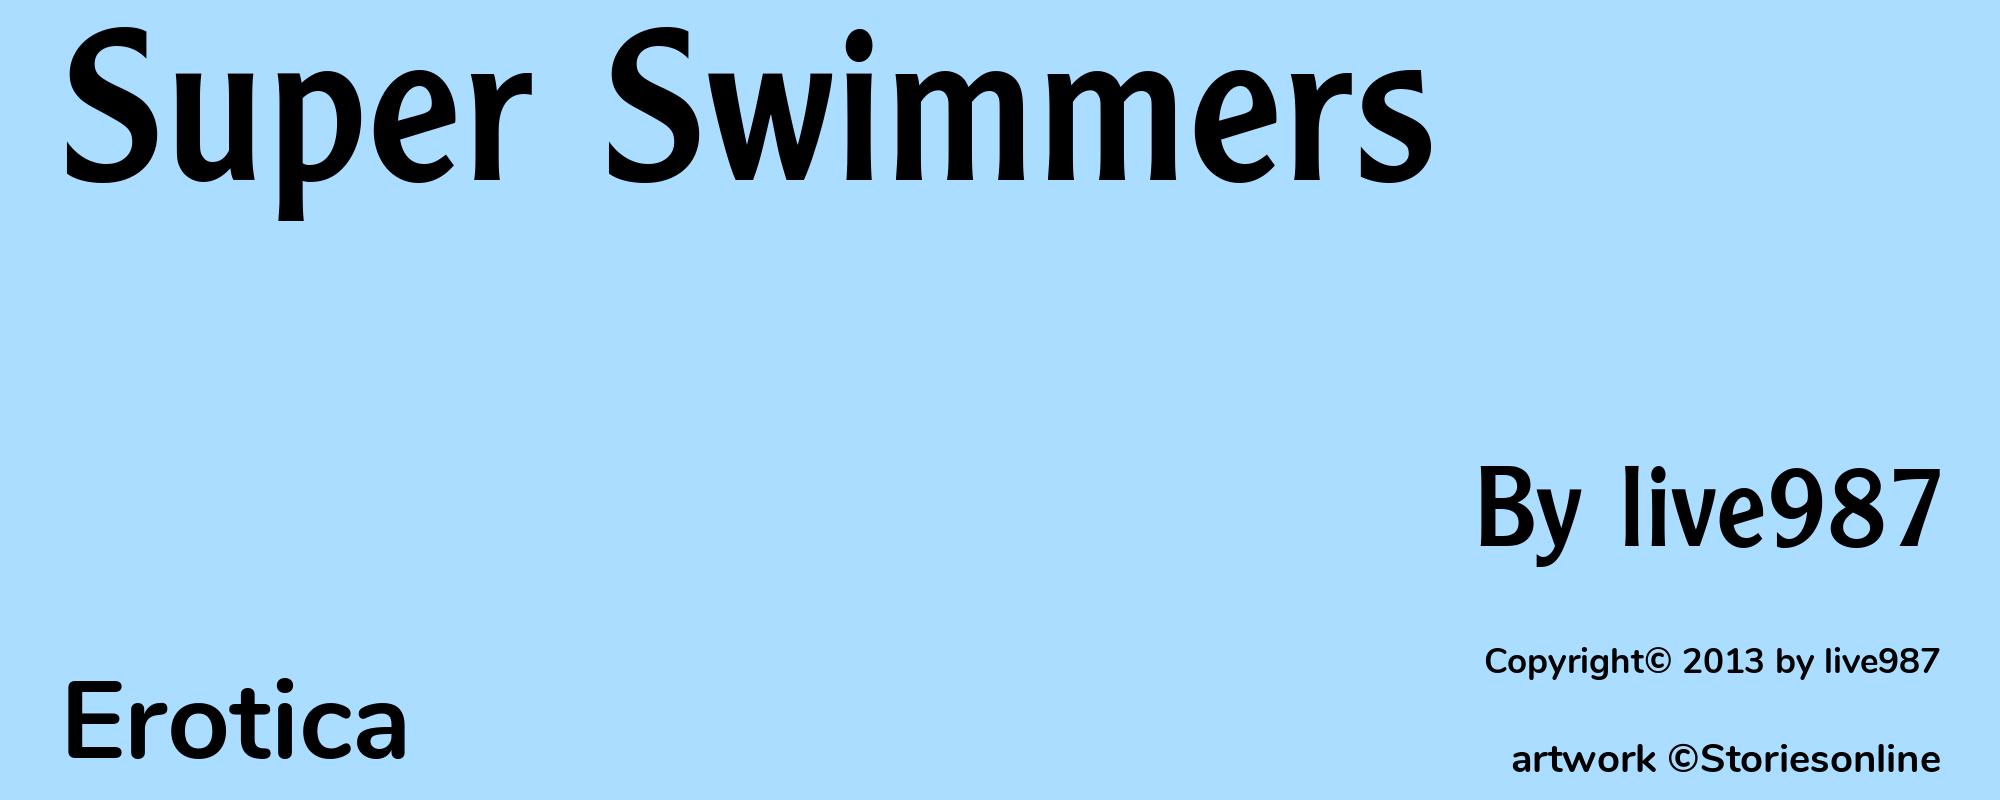 Super Swimmers - Cover